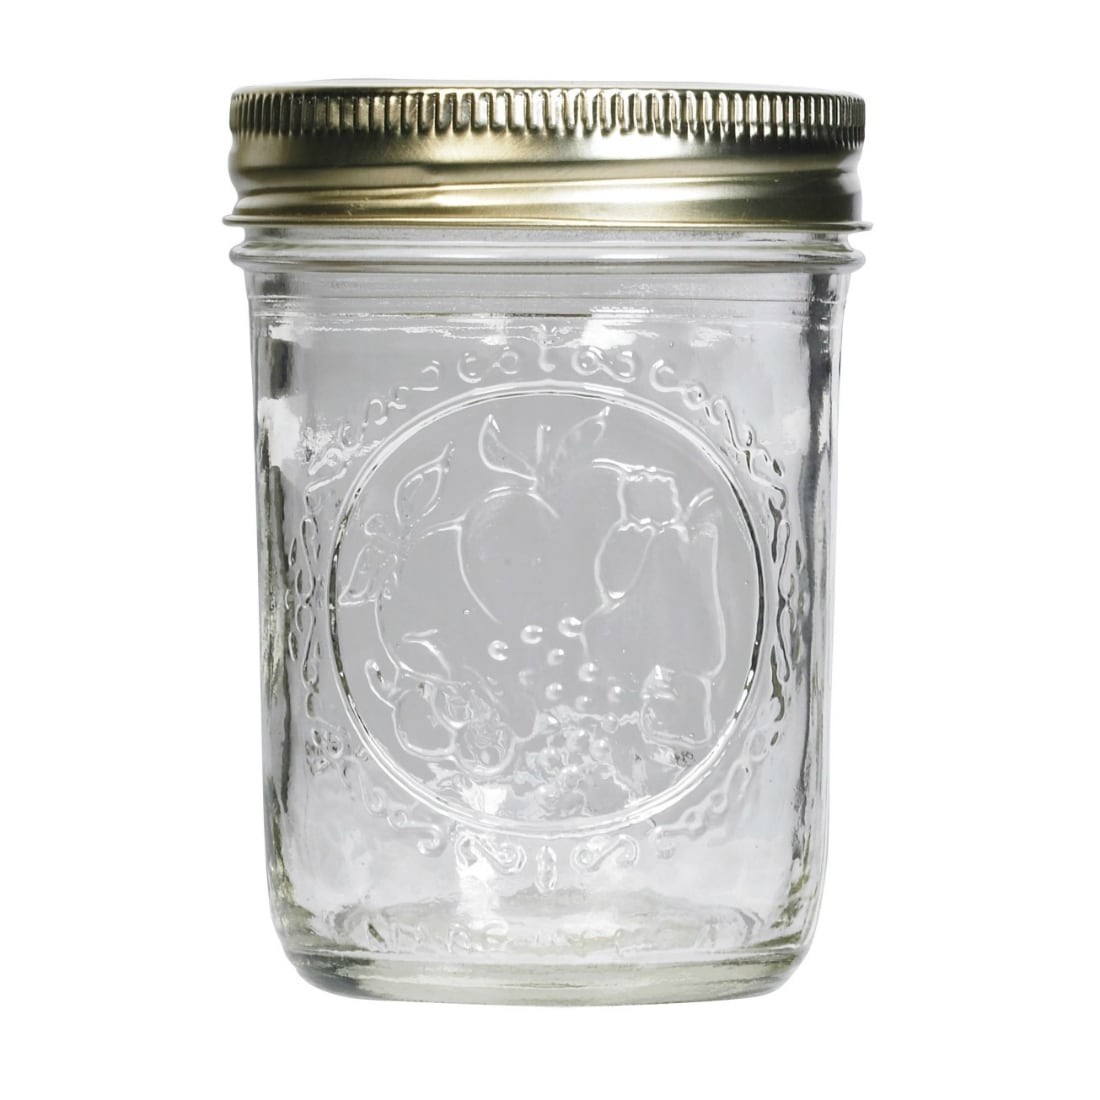 Jarware Wide Mouth Snack Pack for Mason Jars